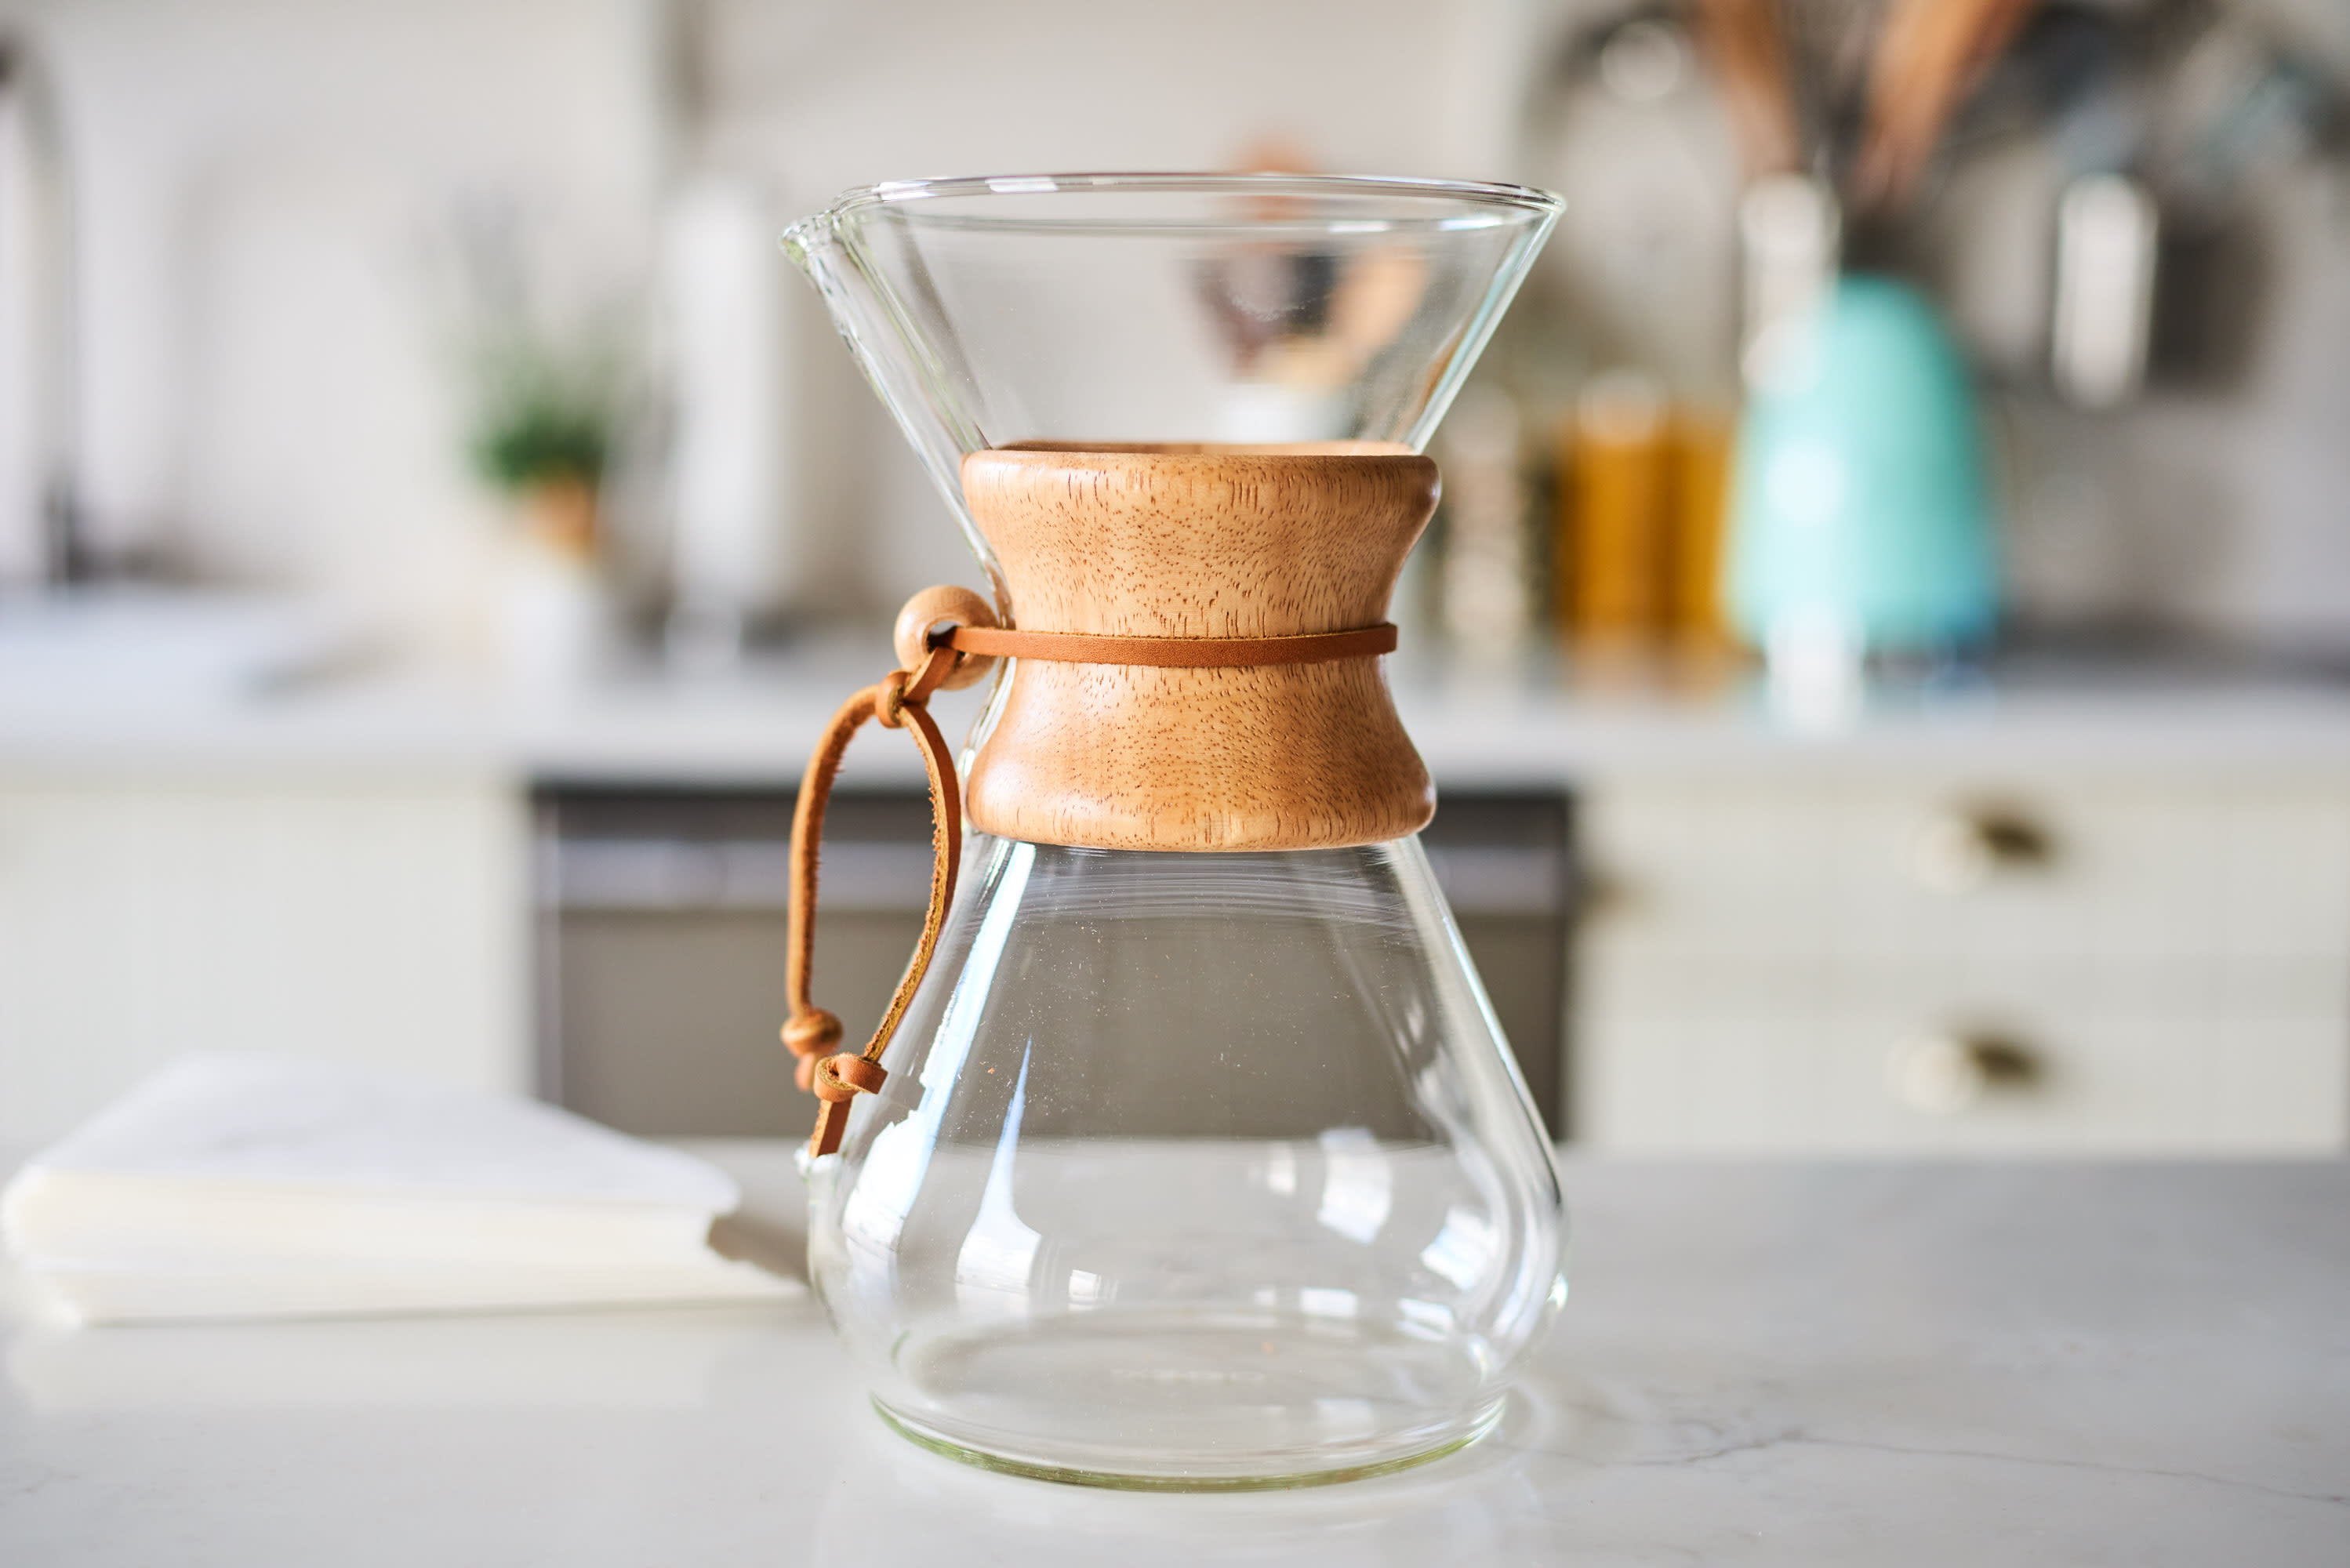 https://cdn.apartmenttherapy.info/image/upload/v1576781987/k/Photo/Lifestyle/2019-12-Chef-Showdown-Coffee-Makers/Chef-Showdown-Coffeemakers-Chemex_028.jpg